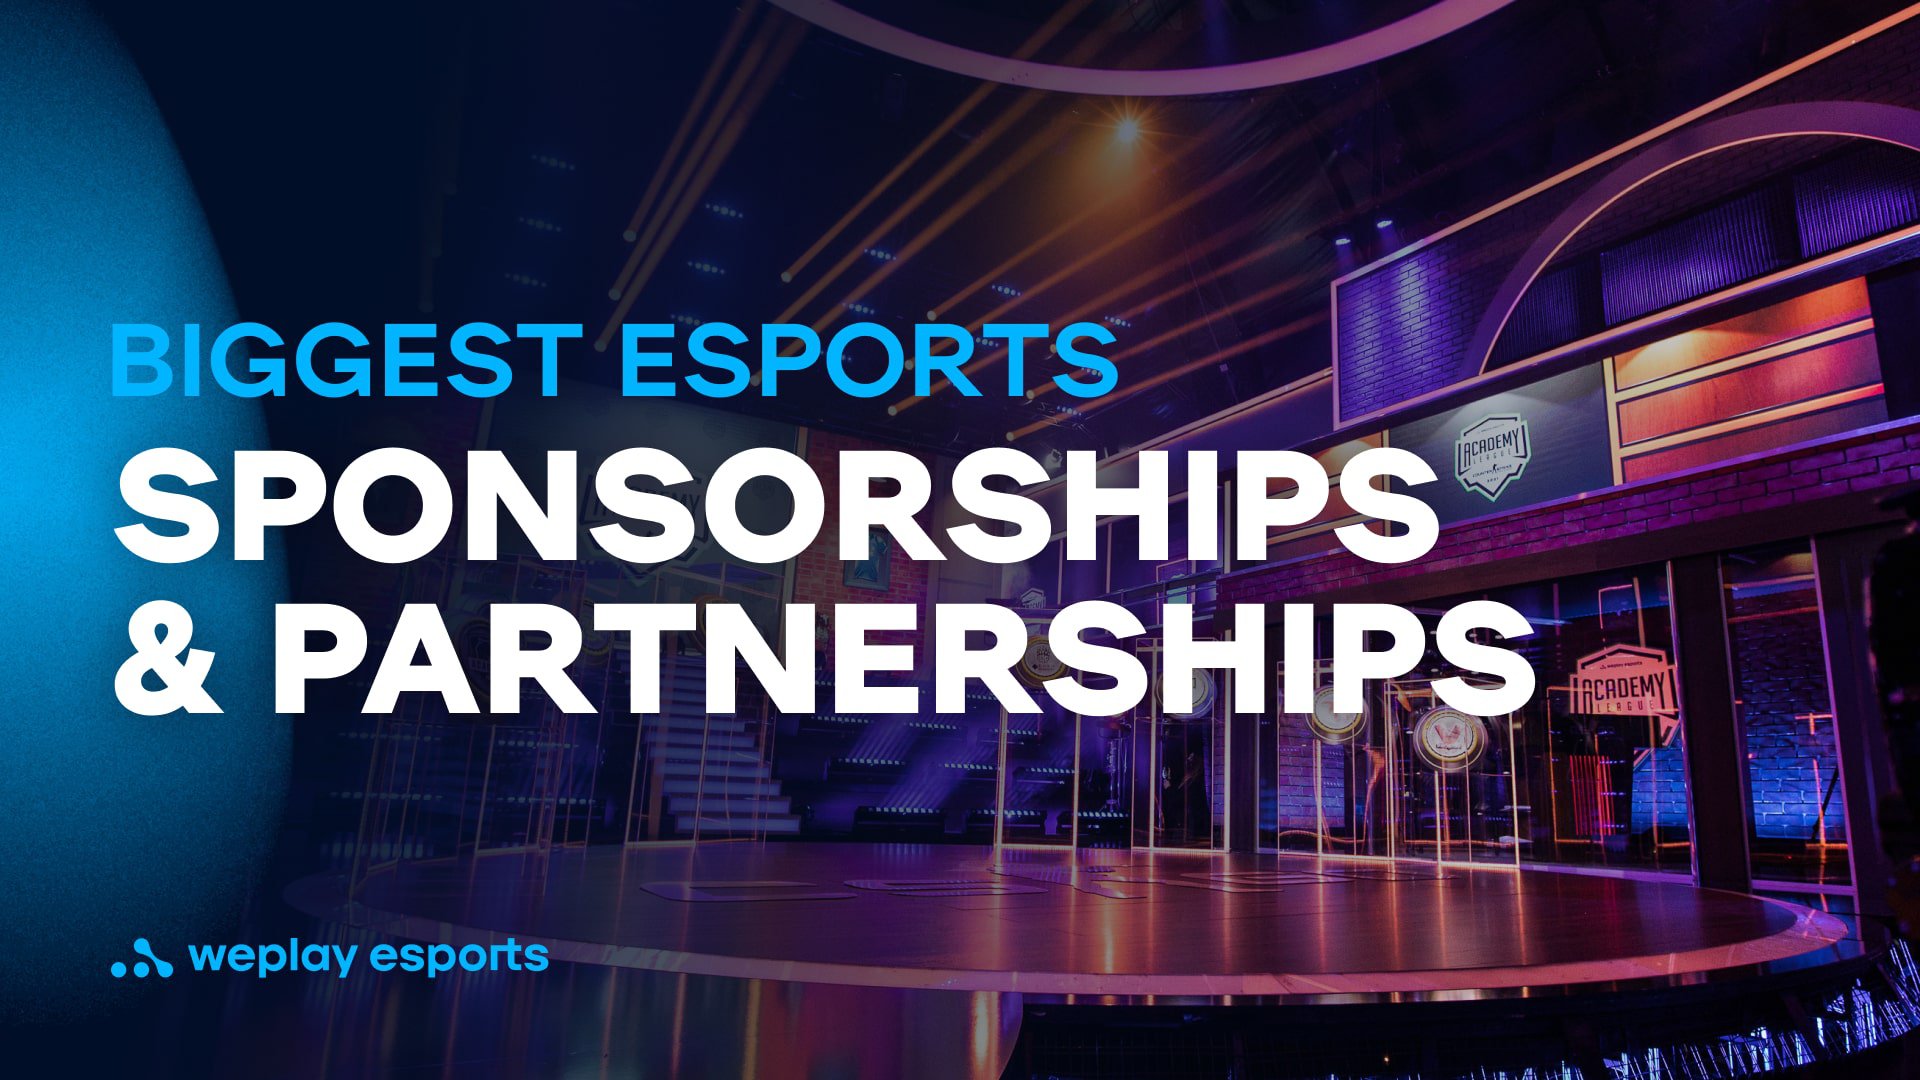 Examples of sponsorships and partnerships. Credit: WePlay Holding